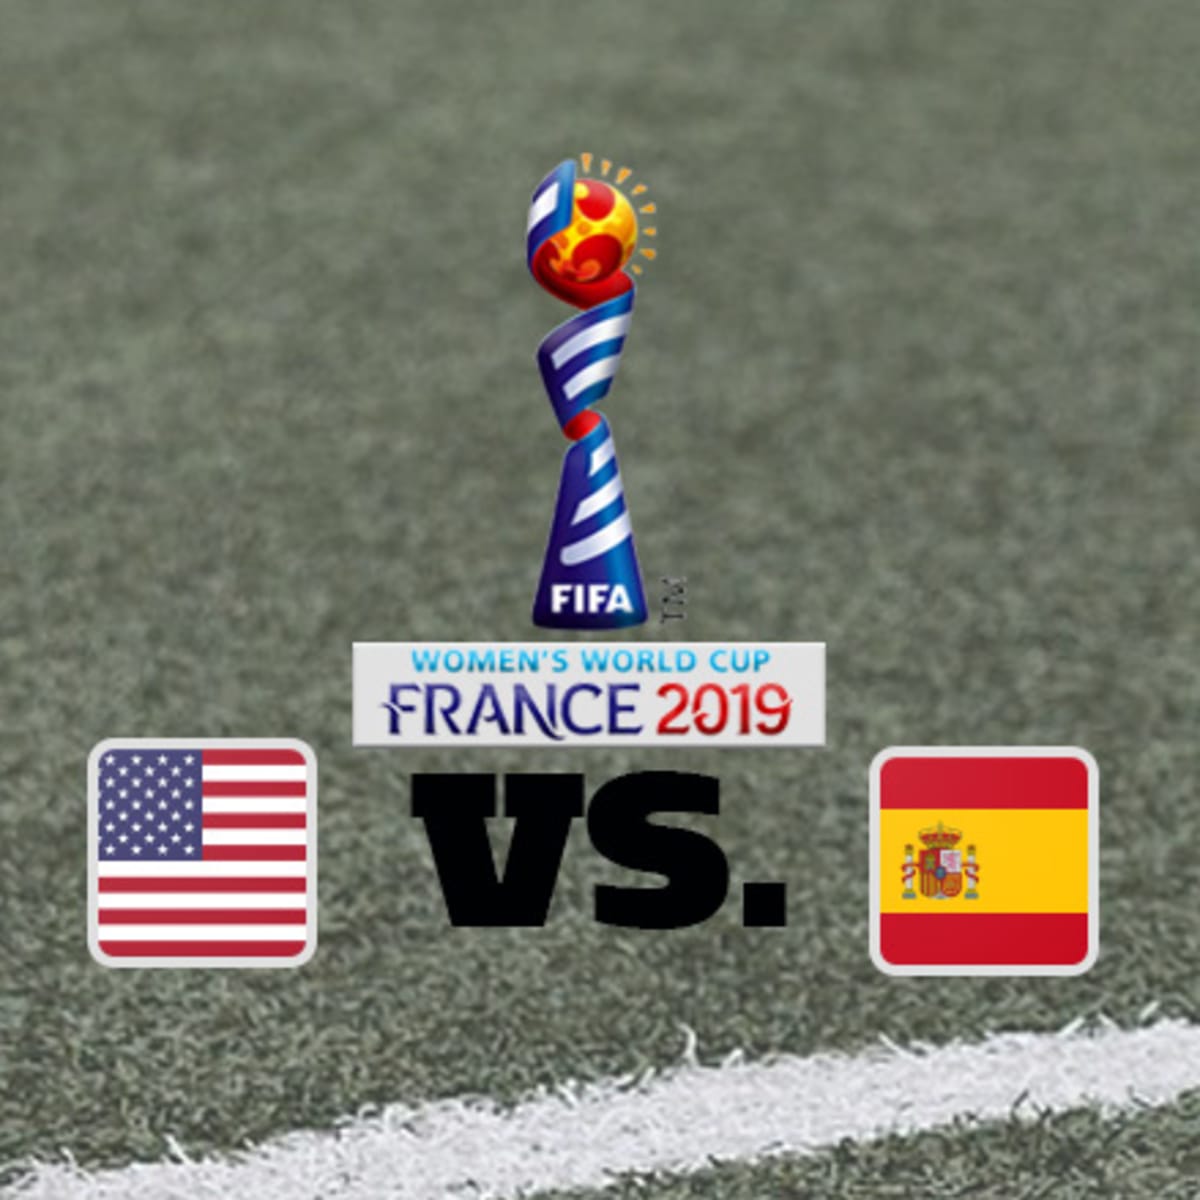 Usa Vs Spain Fifa Women S World Cup Prediction And Preview Athlonsports Com Expert Predictions Picks And Previews